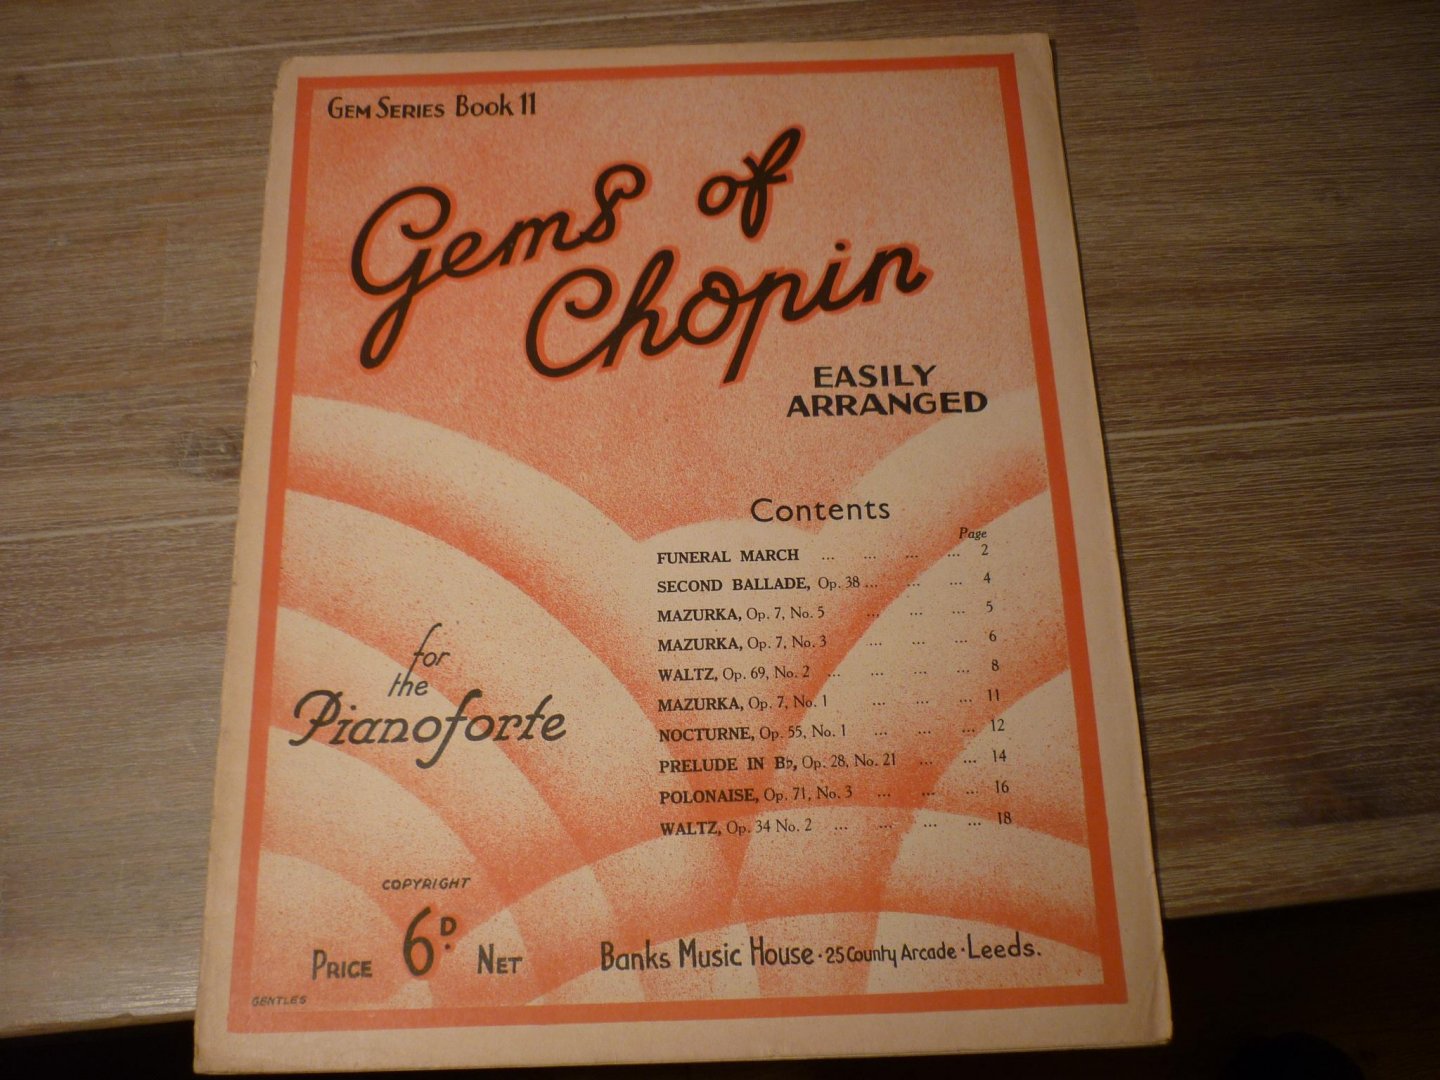 Chopin; Fr. (1810 - 1849) - Gems of Chopin - Book 11 Gem serie - for the Pianoforte